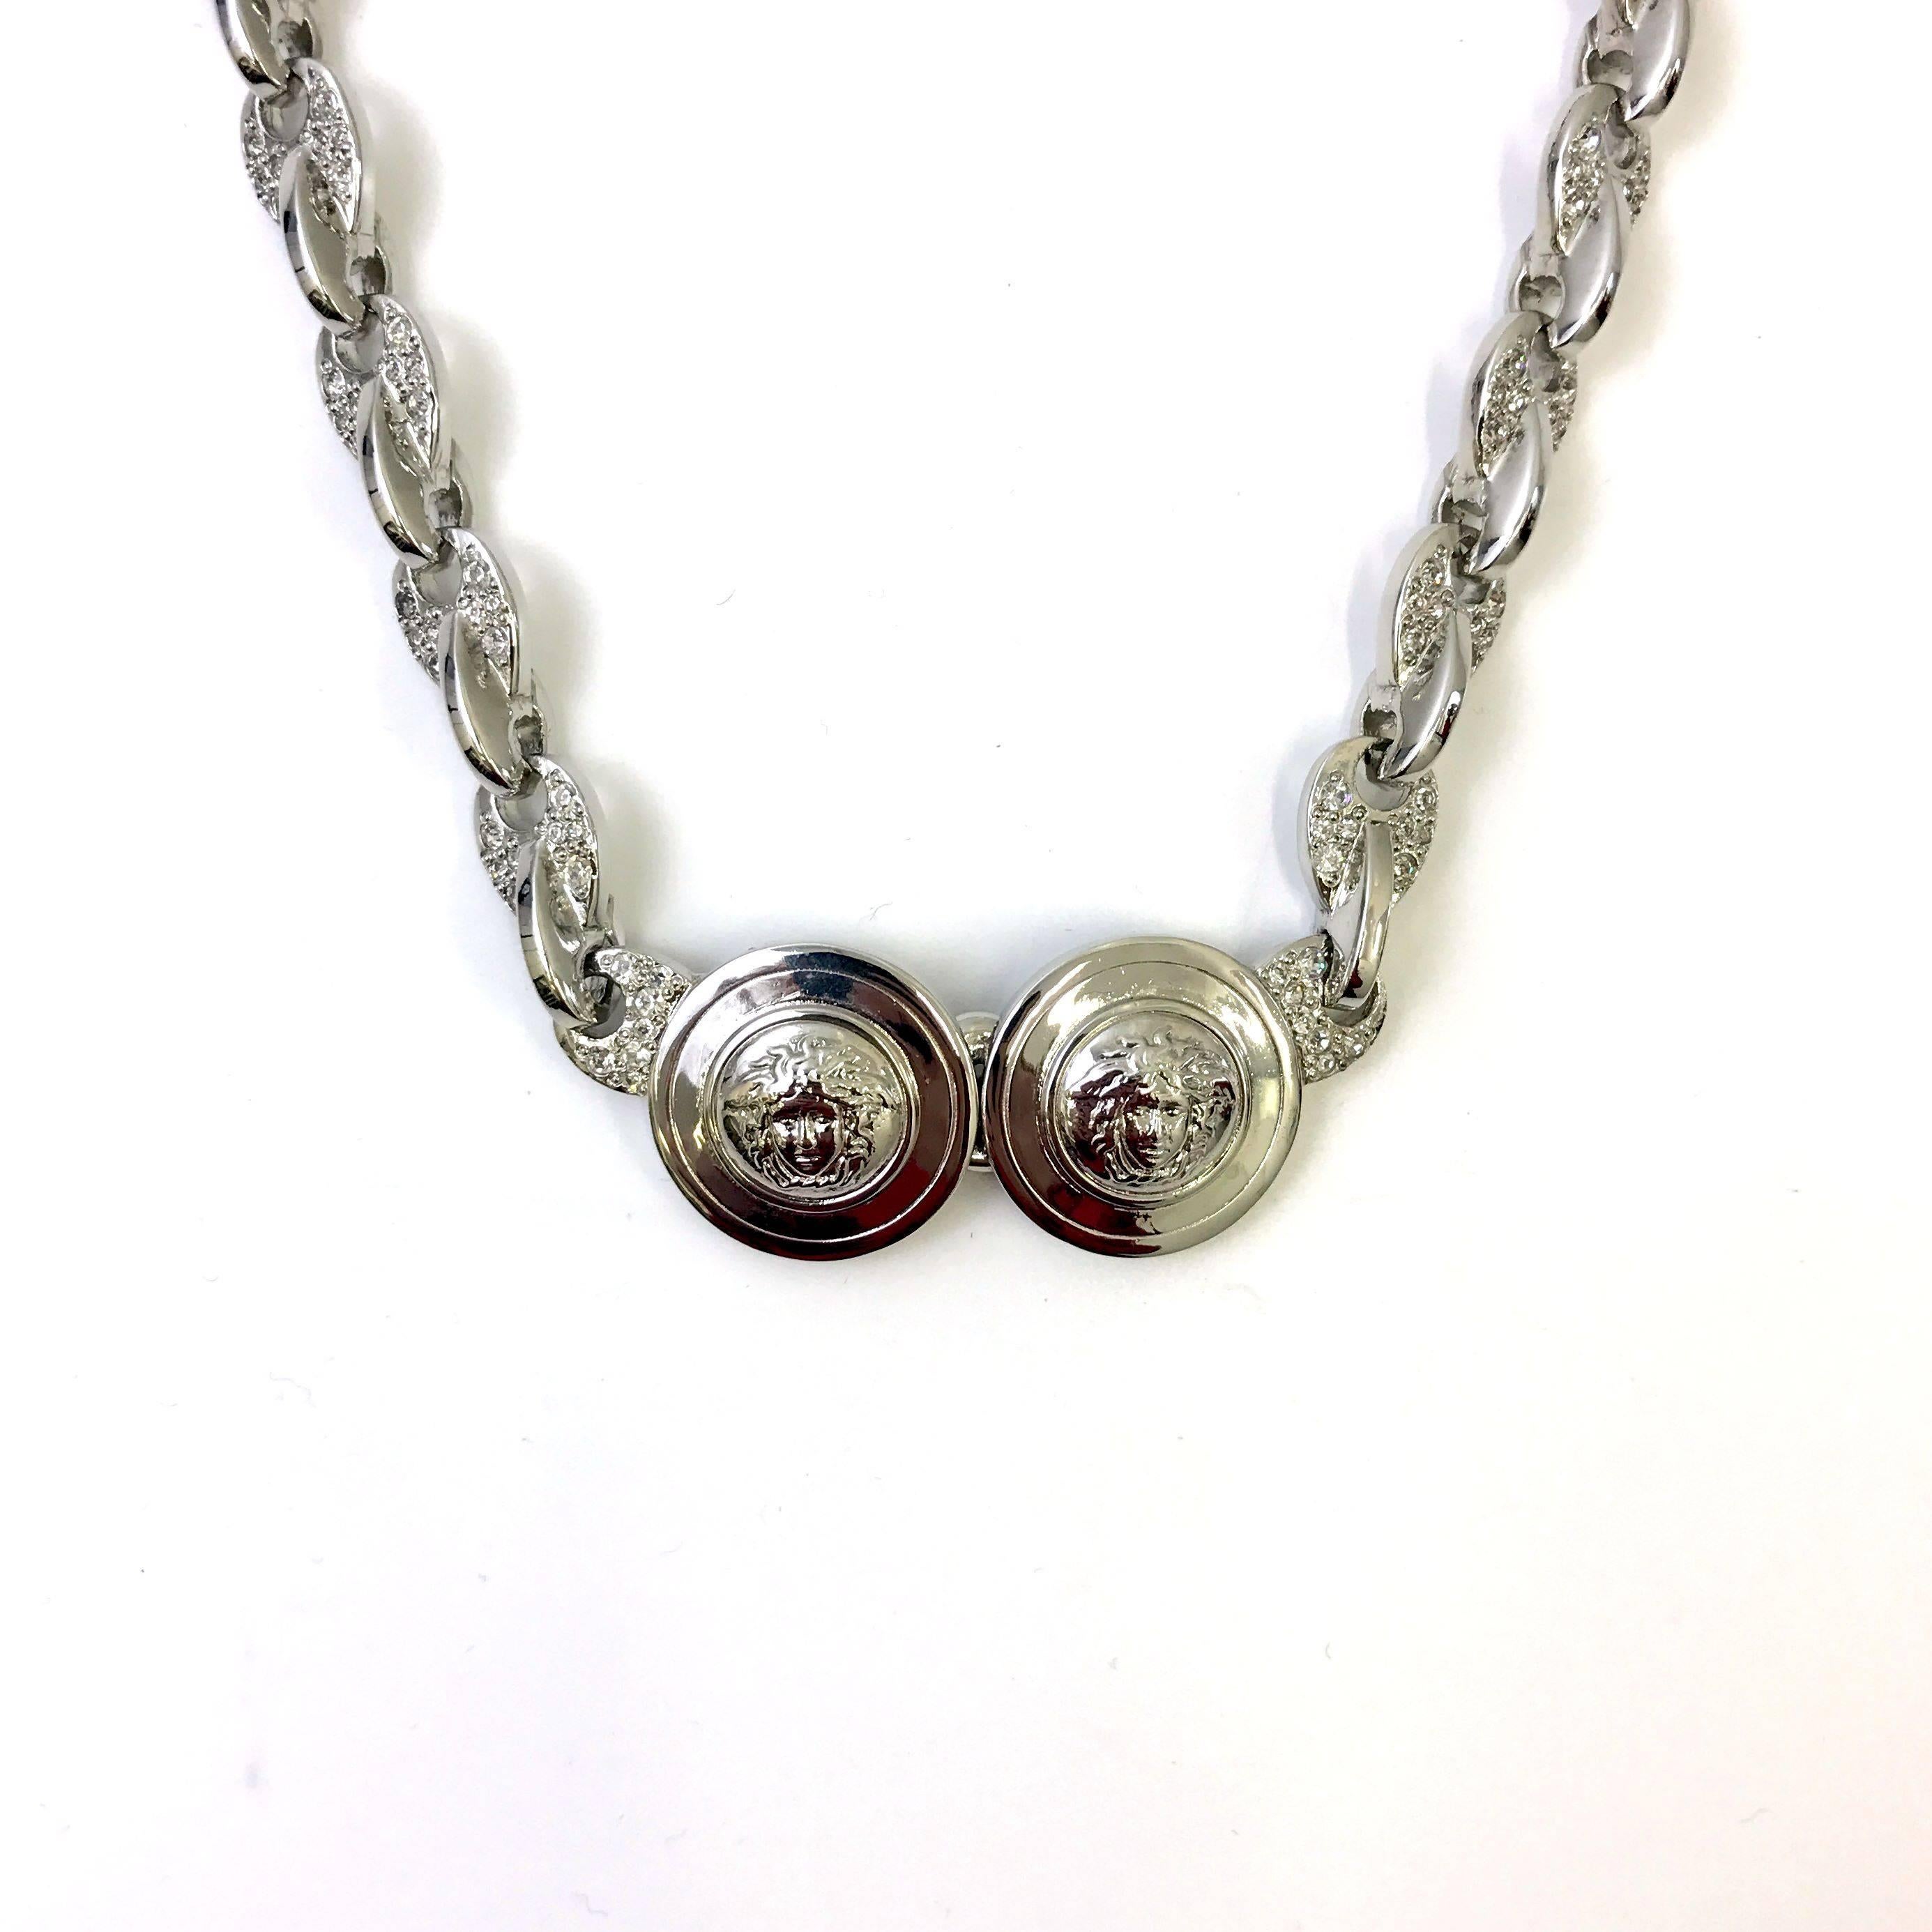 This is a iconic necklace from the famous Italian designer Gianni Versace from the 1990s. The necklace features a silver toned metal chain with a unique style link covered in rhinestones. In the centre of the chain there are two circle medallions